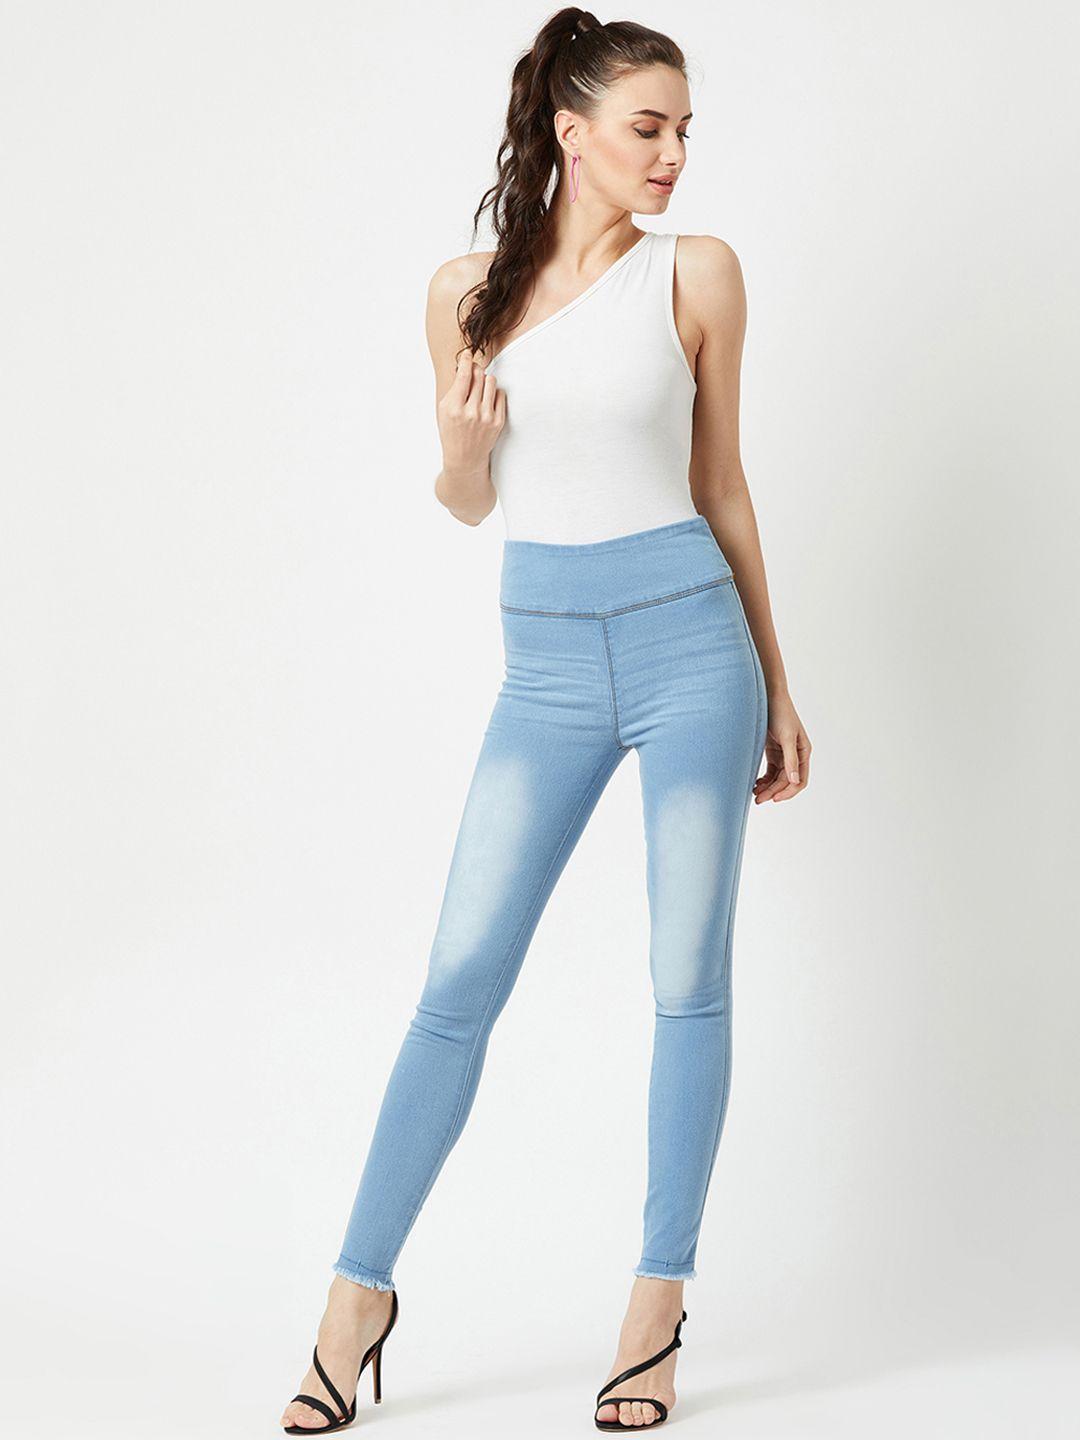 miss-chase-women-blue-washed-skinny-fit-denim-jeggings